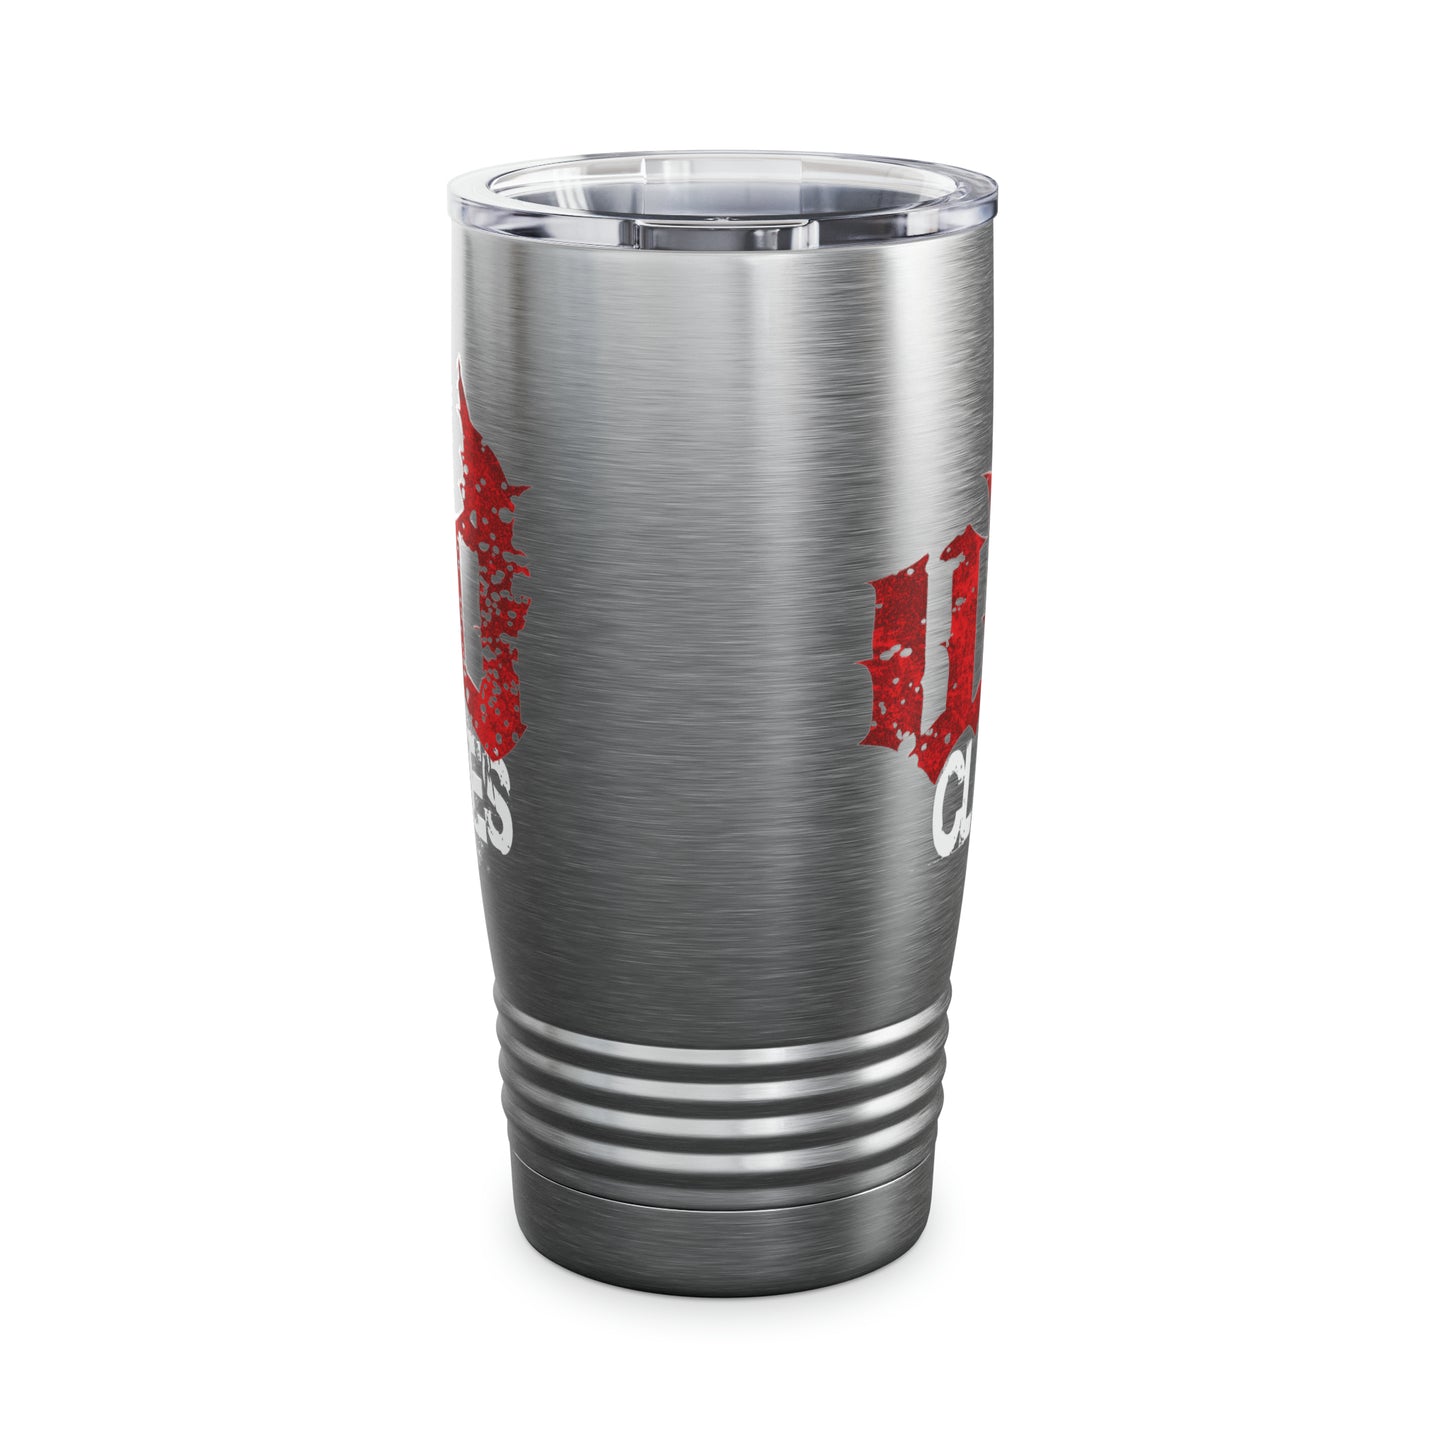 Wicked Clothing Industries 2024 Ringneck Tumbler, 20oz